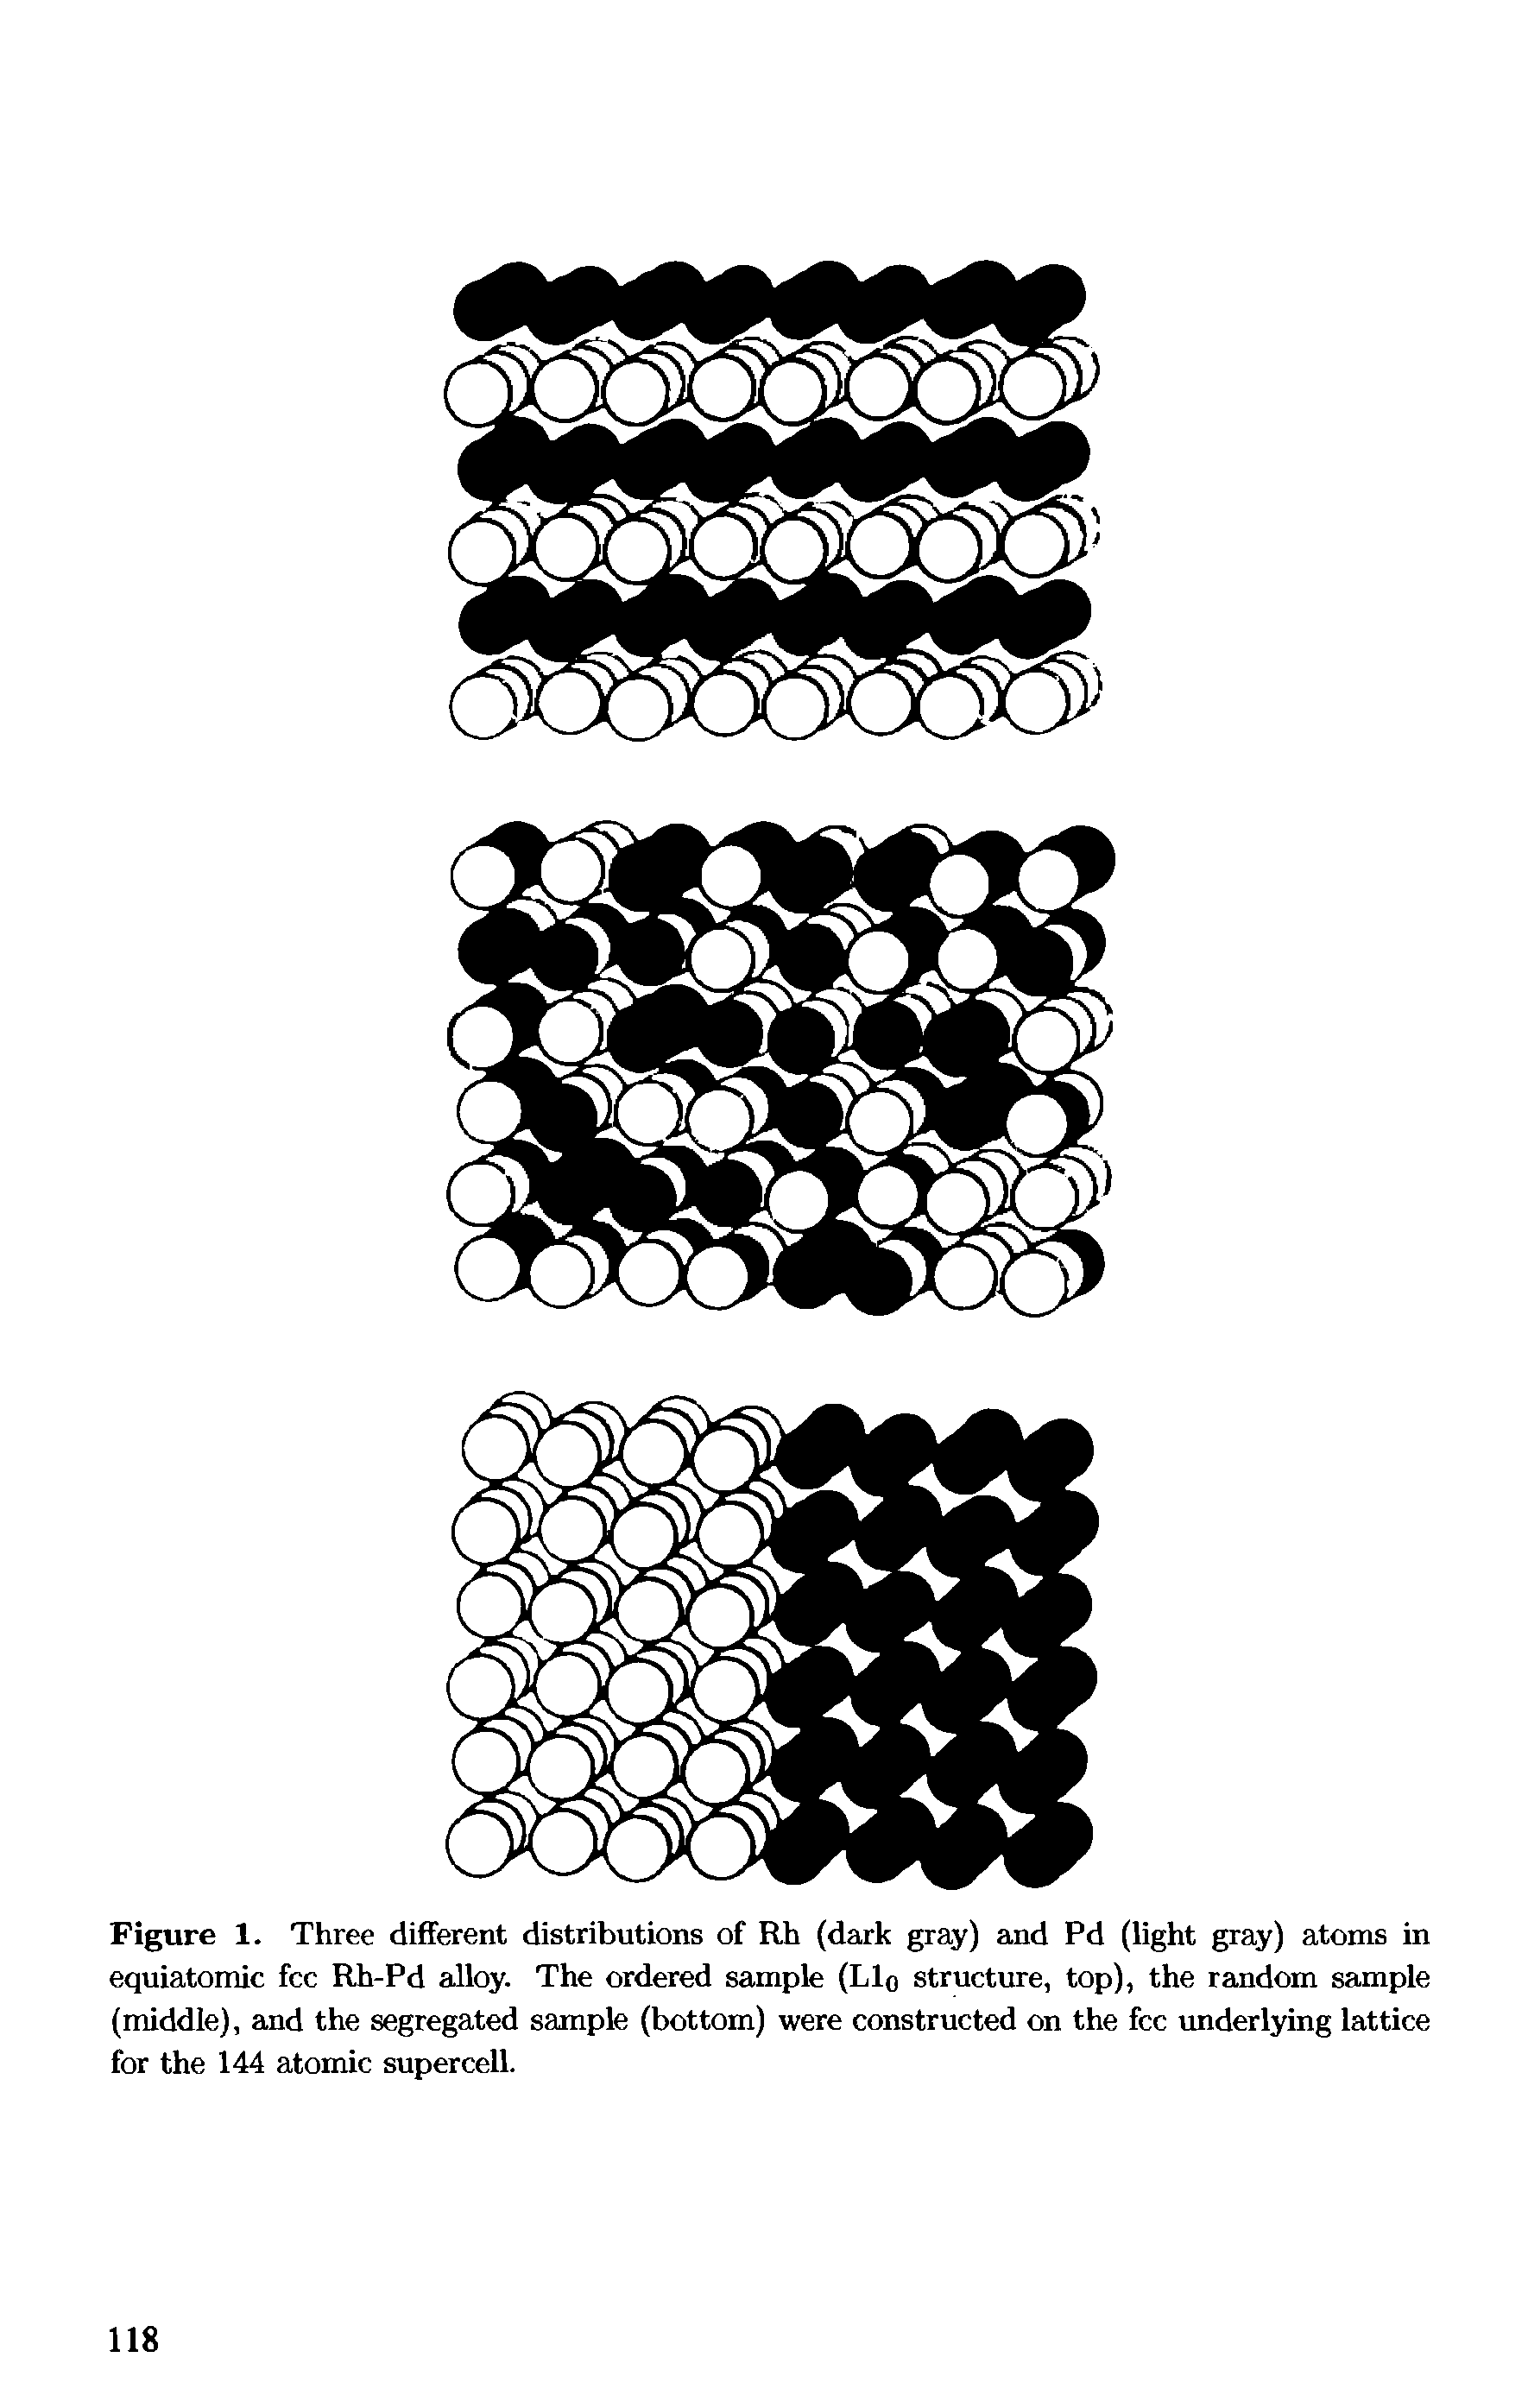 Figure 1. Three different distributions of Rh (dark gray) and Pd (light gray) atoms in equiatomic fee Rh-Pd alloy. The ordered sample (LIq strueture, top), the random sample (middle), and the segregated sample (bottom) were construeted on the fee underlying lattiee for the 144 atomie supereell.